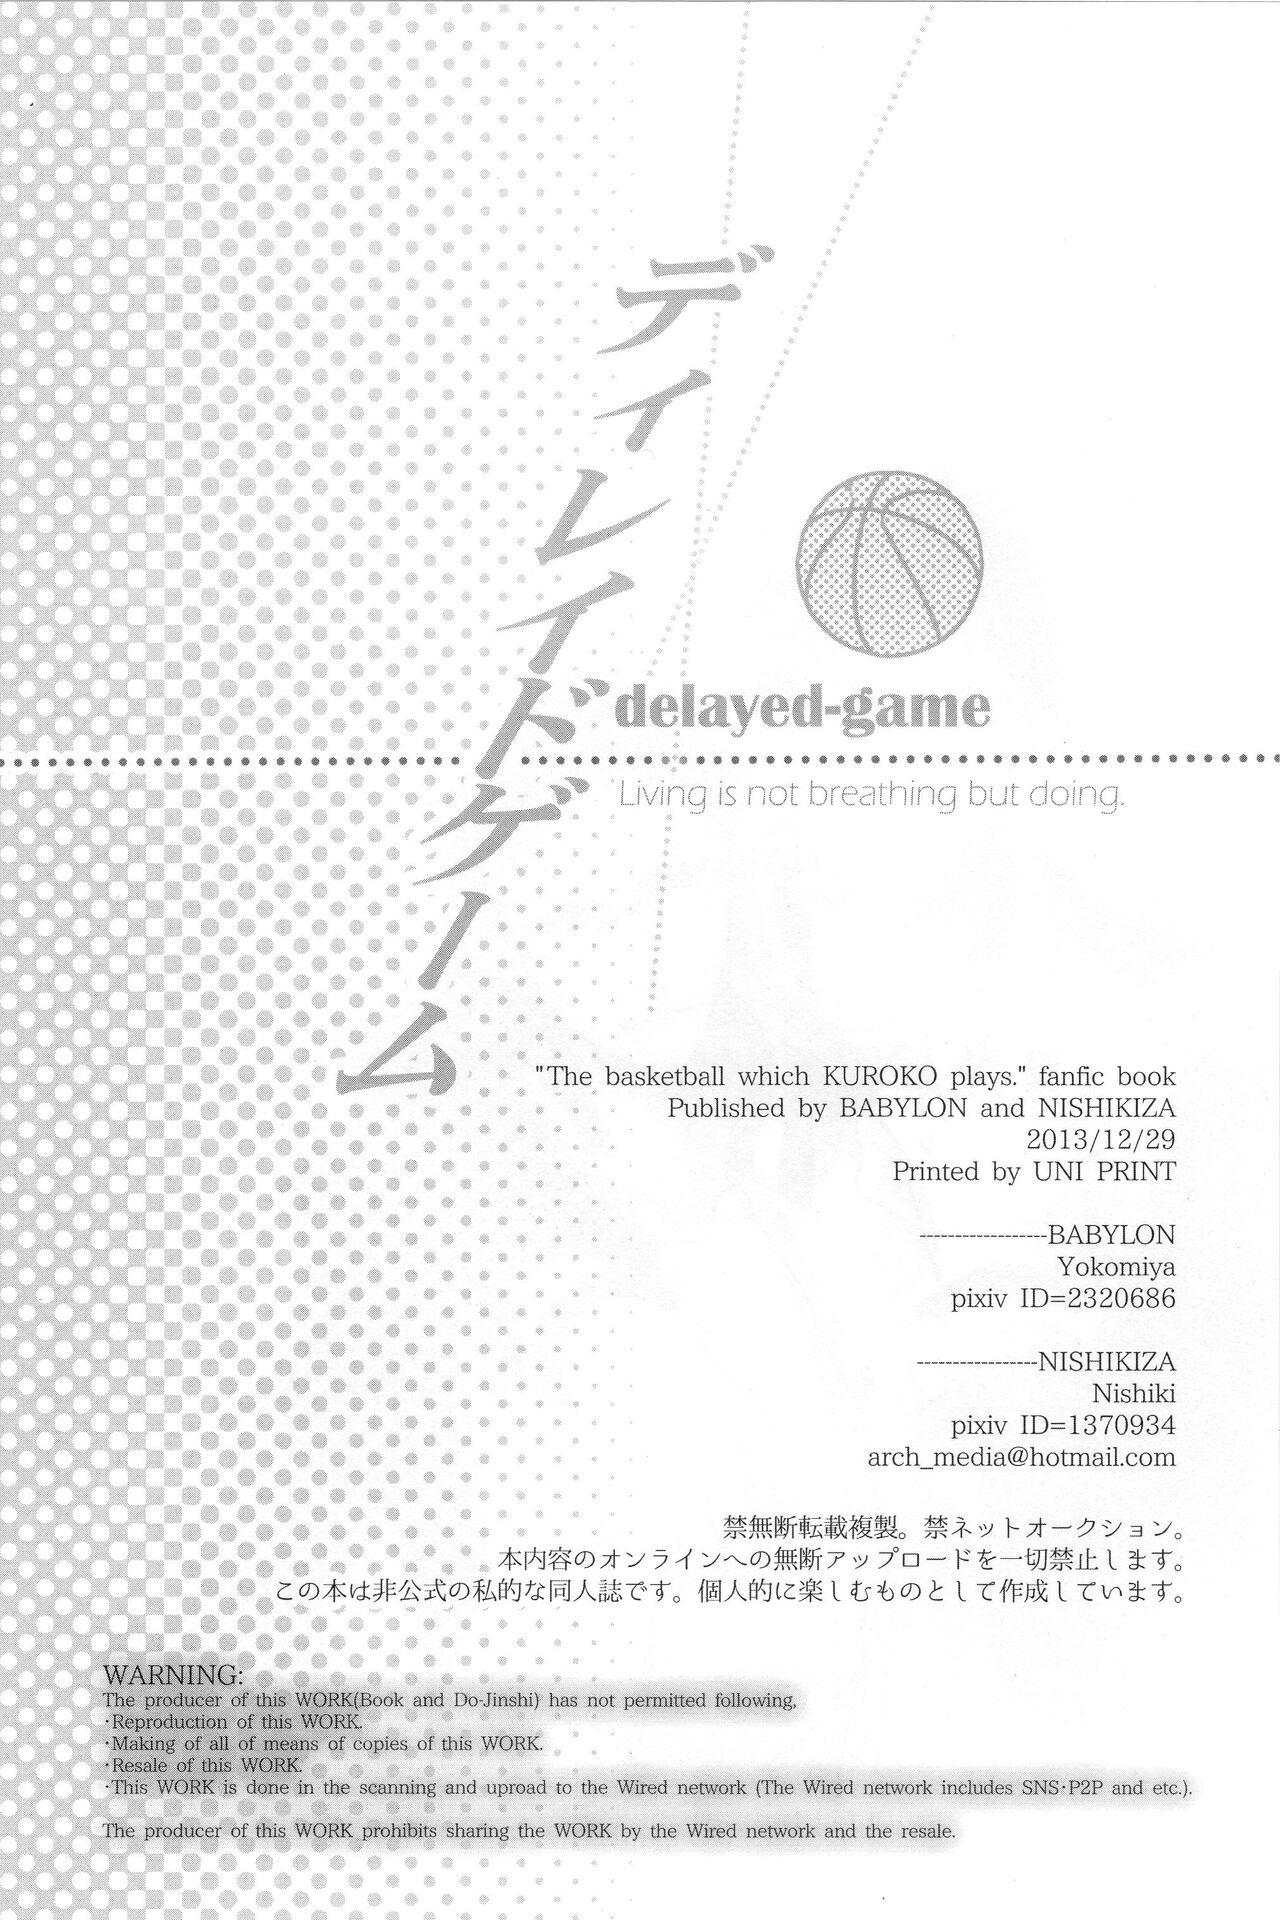 delayed-game 36